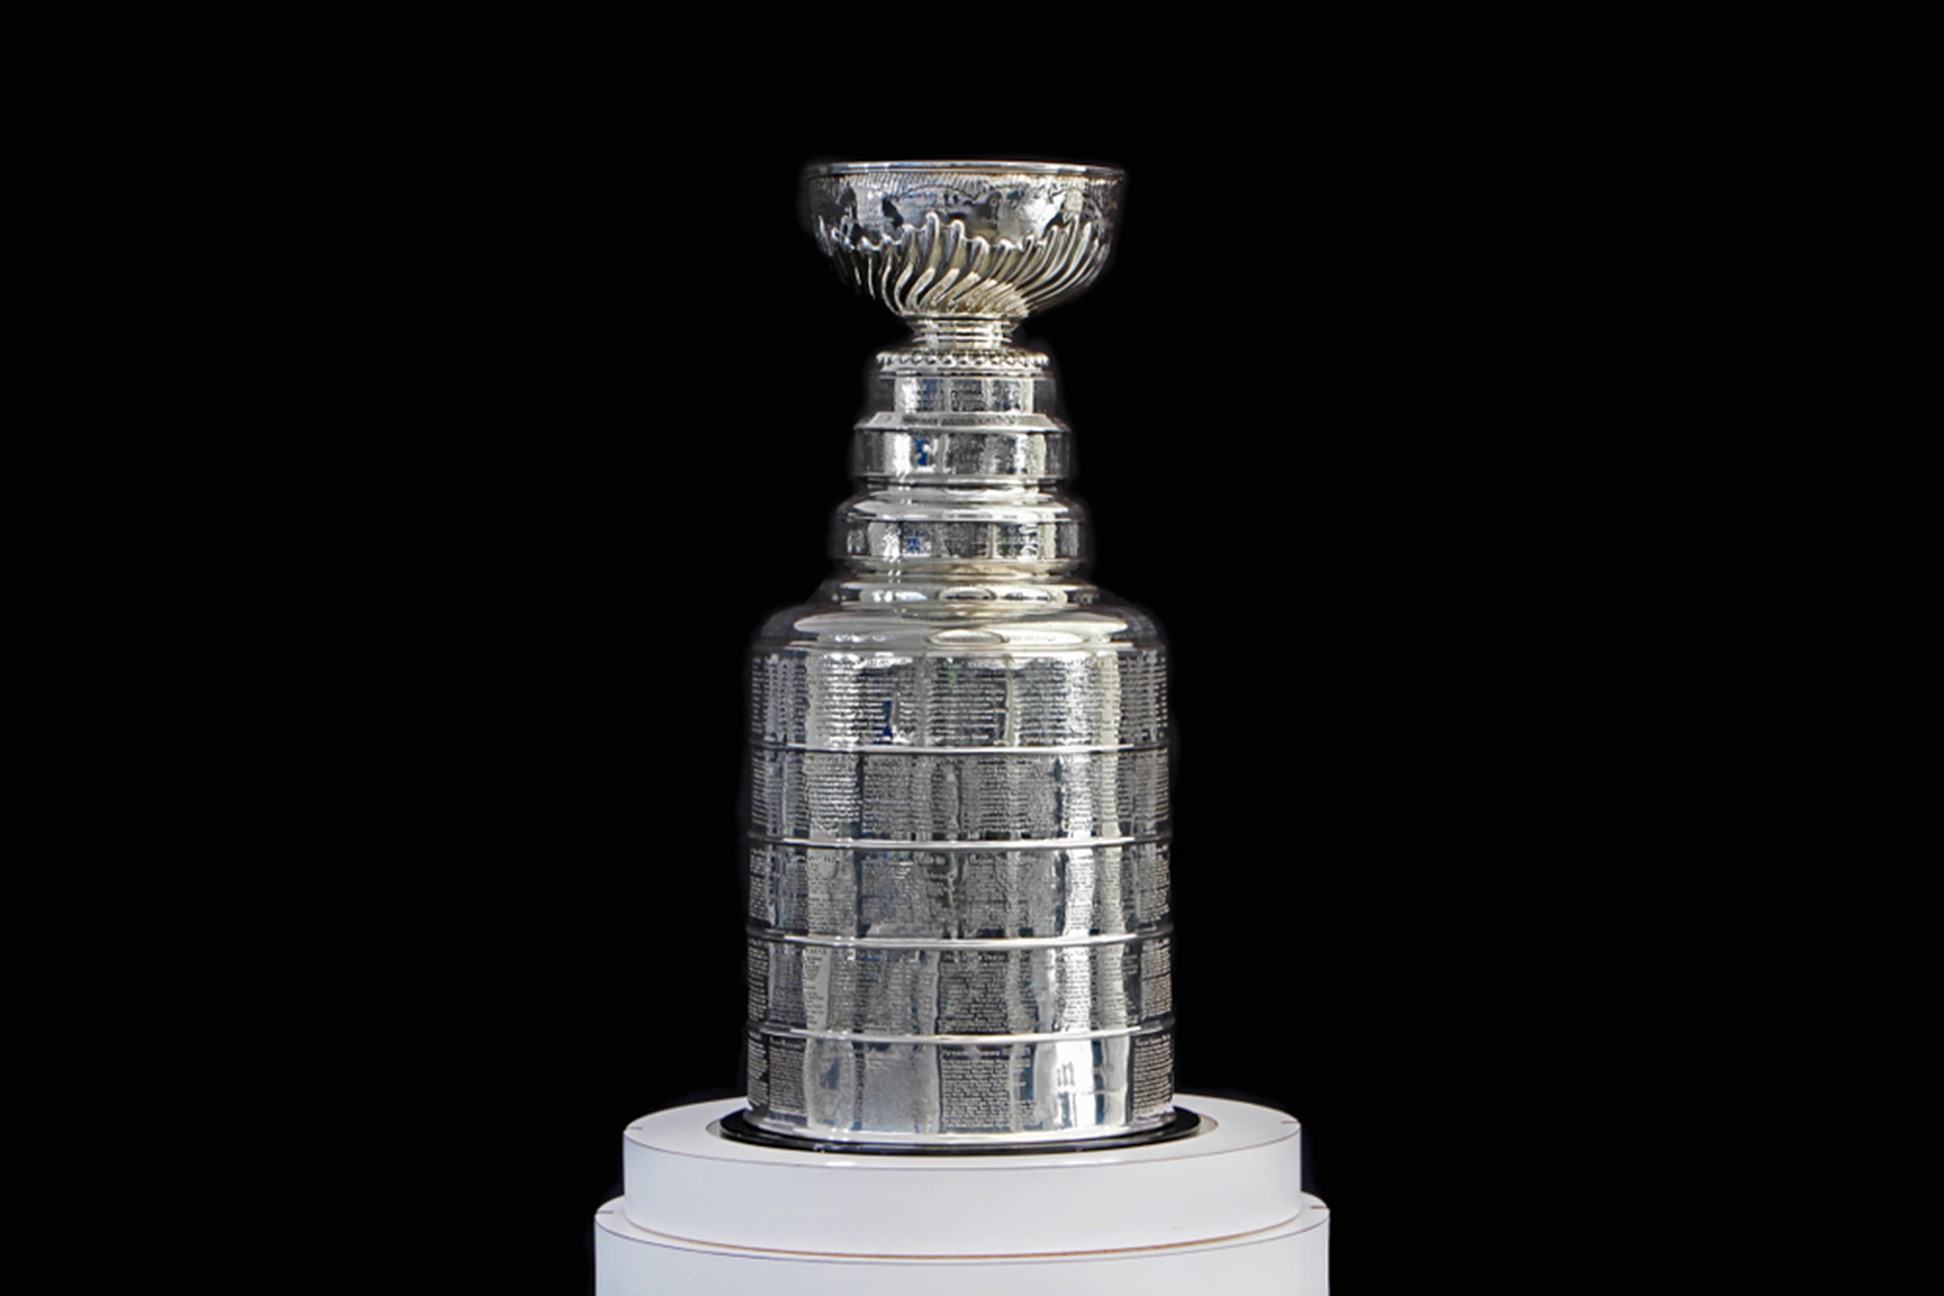 The Stanley Cup holds 14 cans of beer - 10 facts about the legendary trophy  in Boston for Game 7 